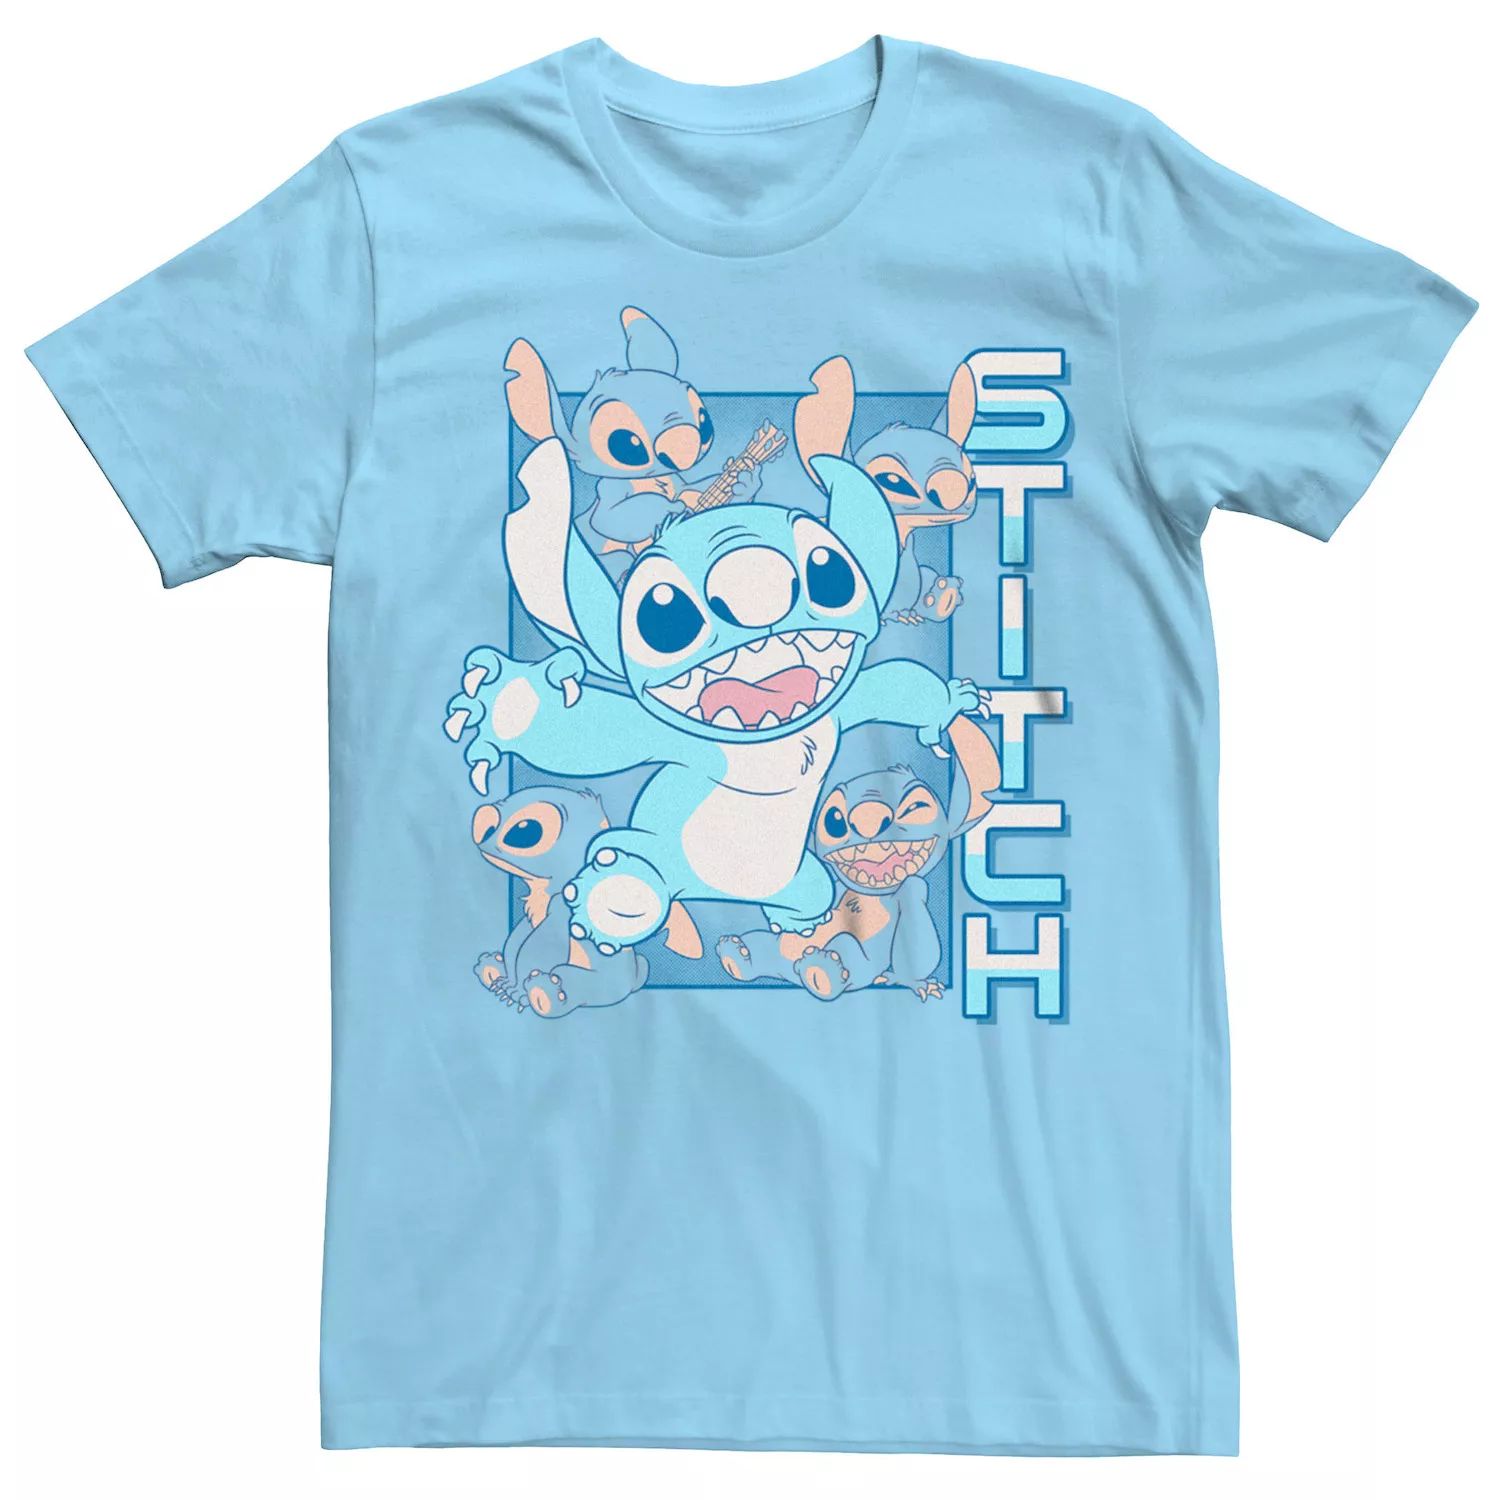 Мужская футболка Disney's Lilo & Stitch Stitch's Many Moods and Faces Licensed Character ripndip many faces sherpa